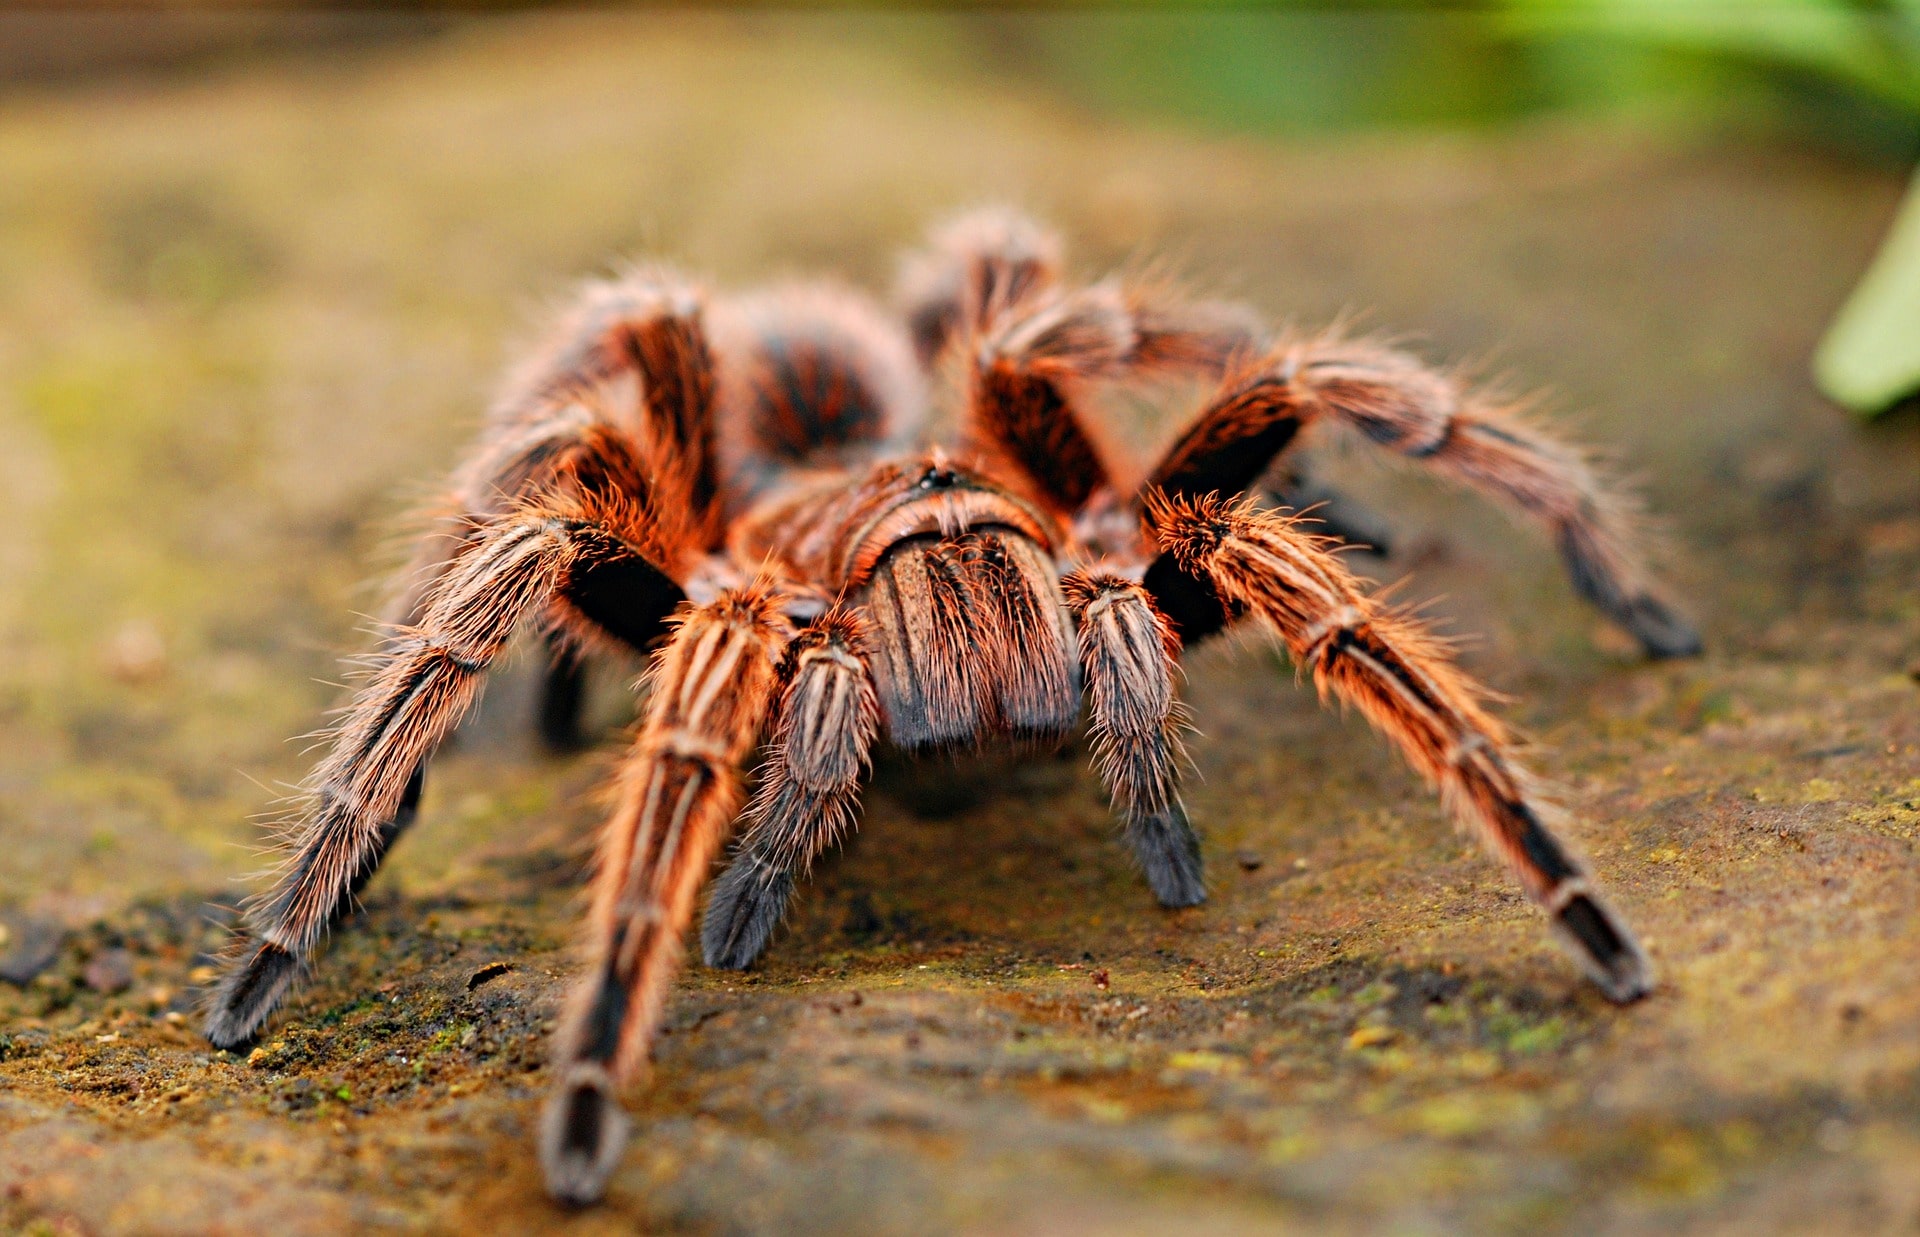 When you best care for a pet tarantula, they are rewarding pets.